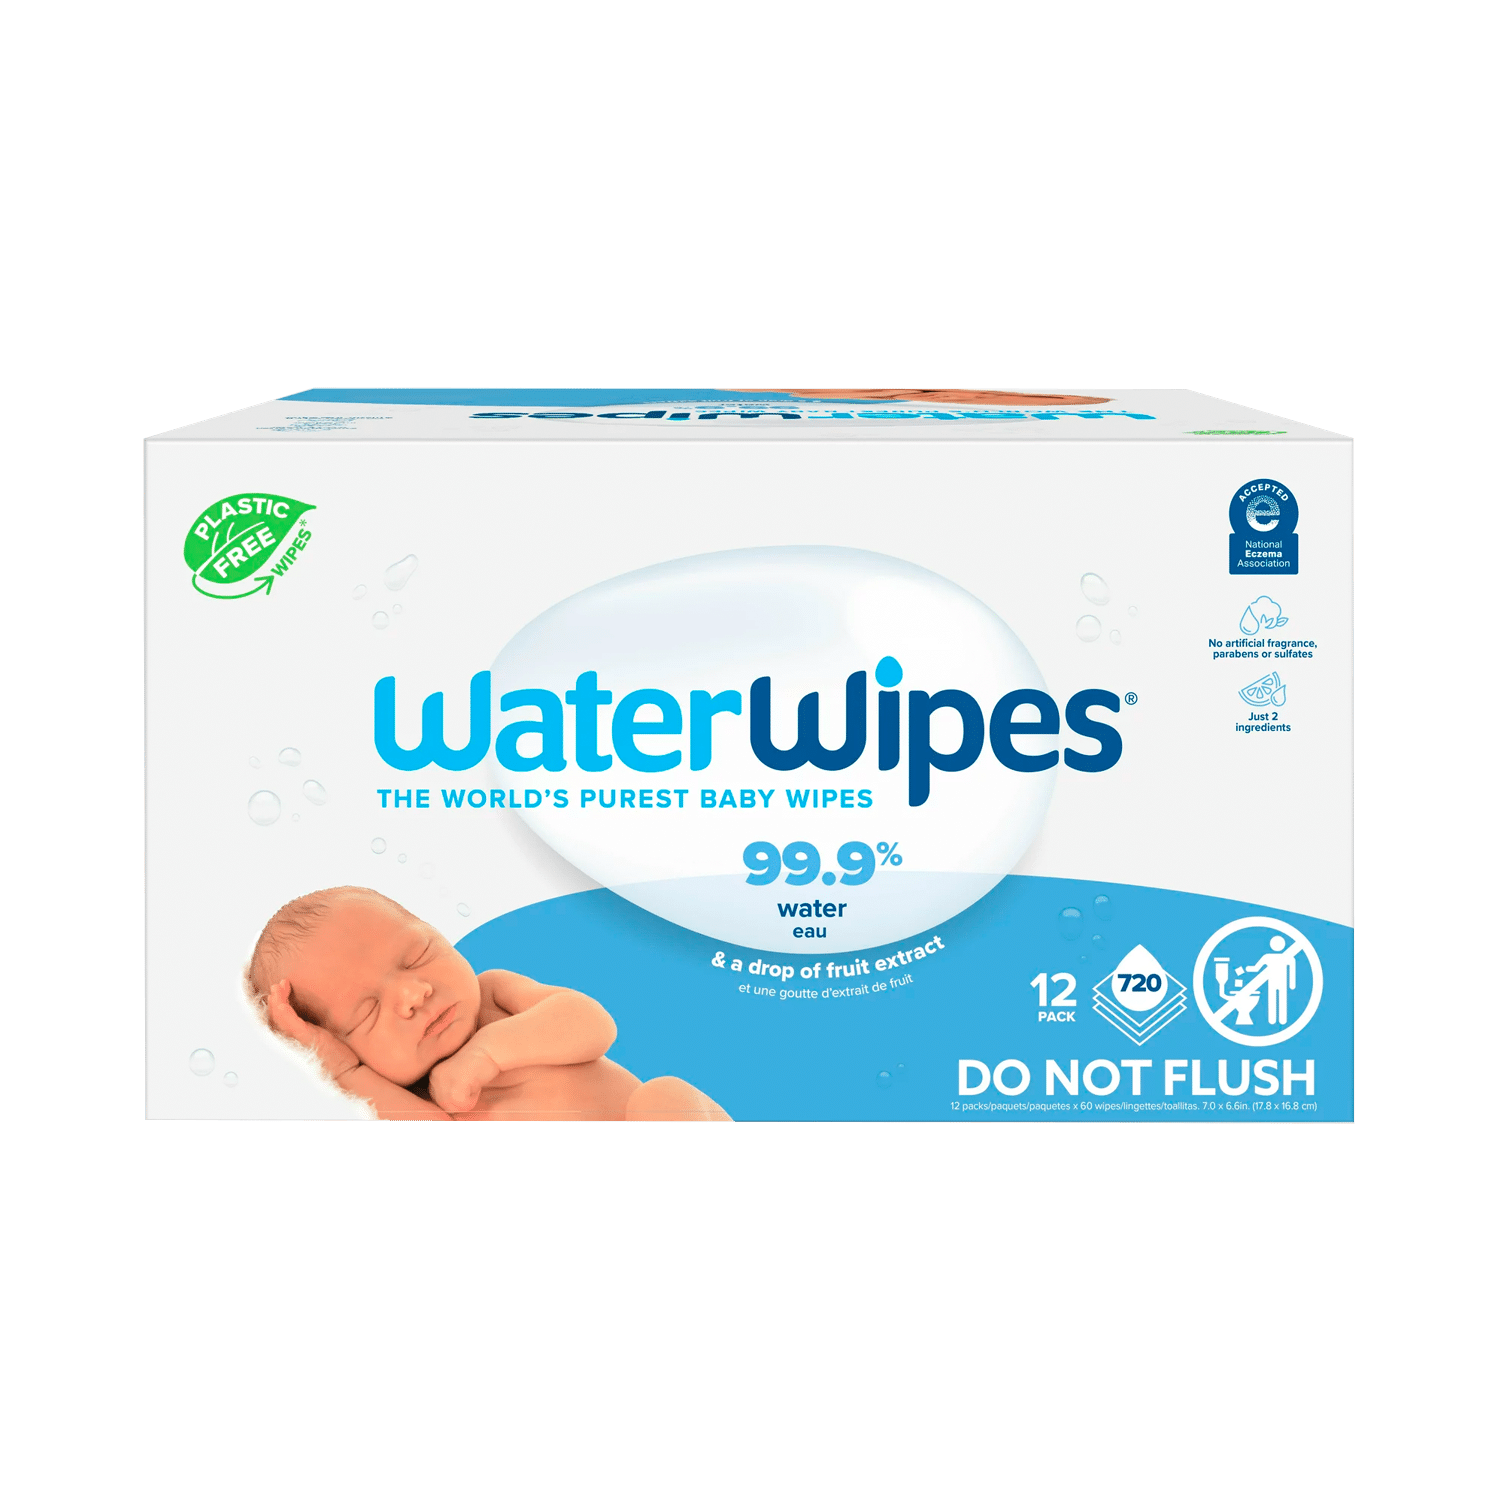 WaterWipes Plastic-Free Original Baby Wipes, 99.9% Water Based Wipes, Unscented & Hypoallergenic for Sensitive Skin, 720 Count (12 Packs)